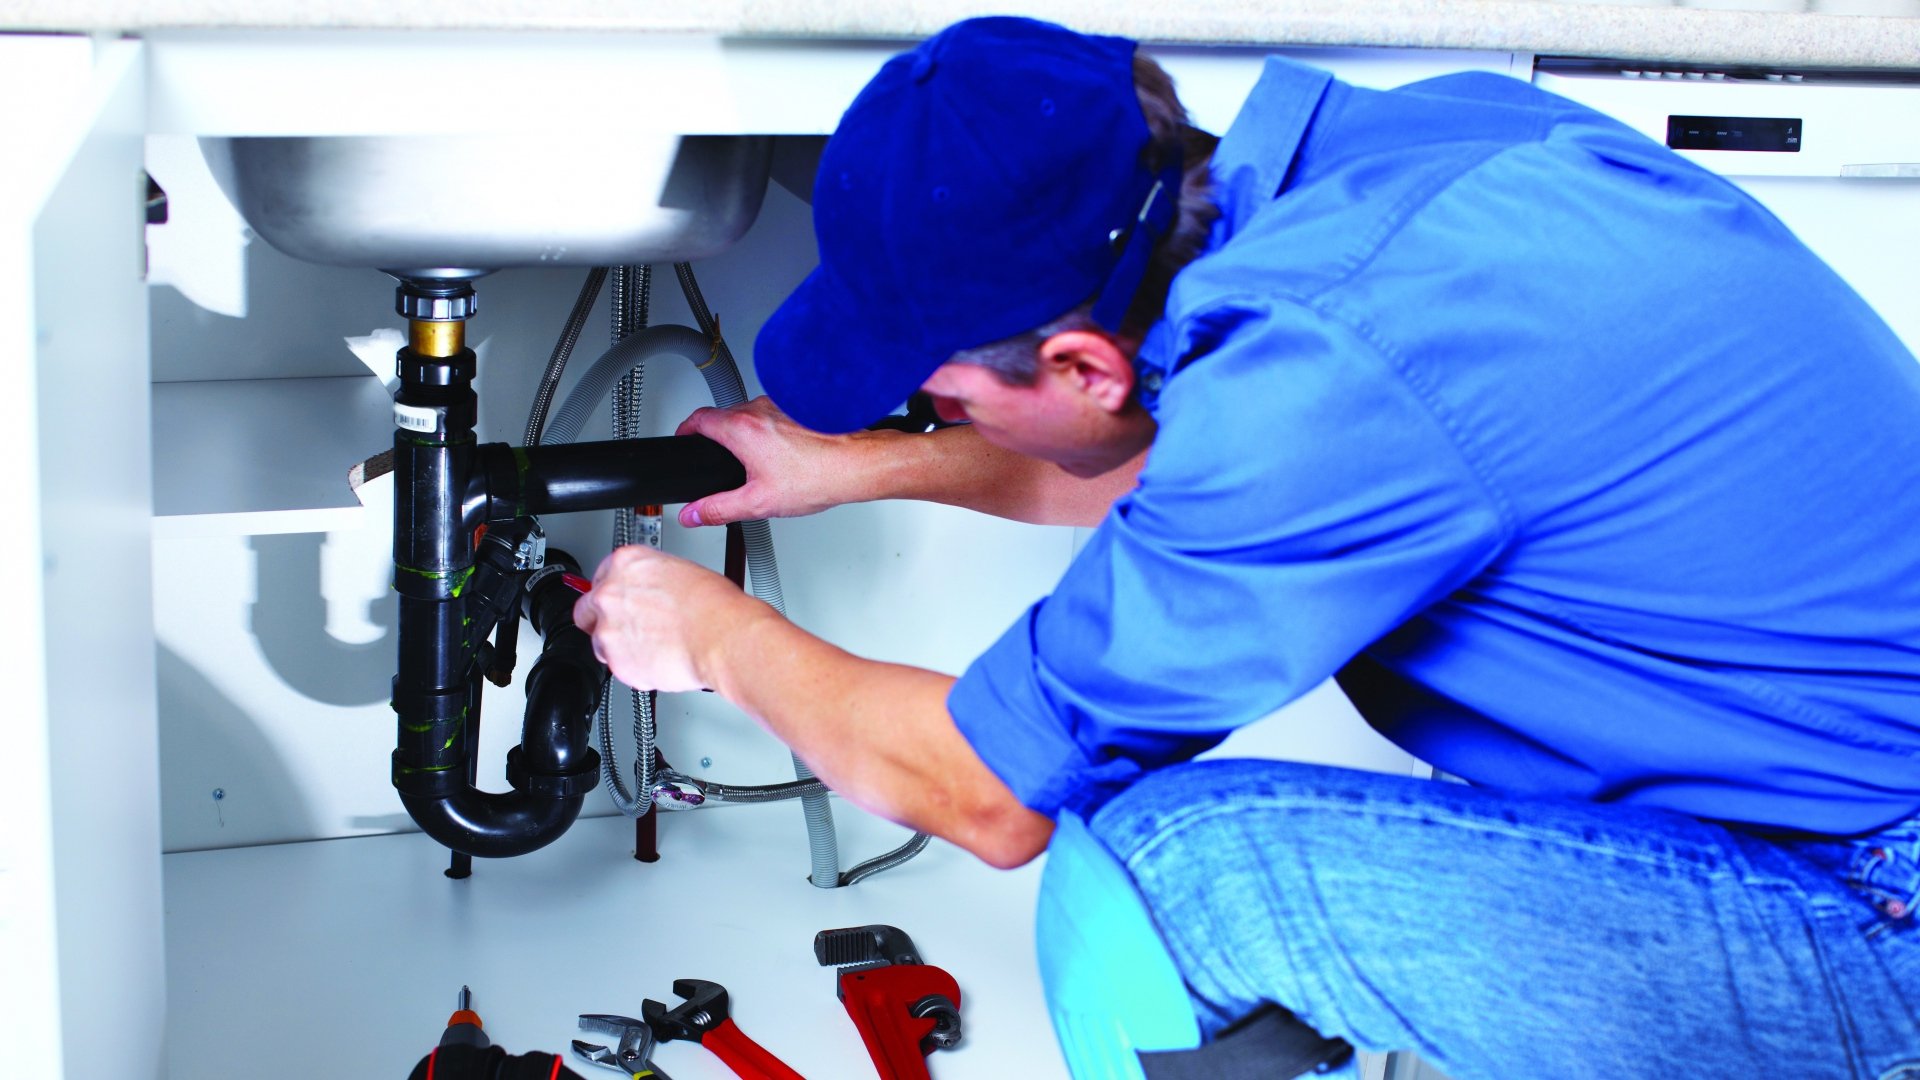 How to Find Plumbers near Me in Sarasota Florida?